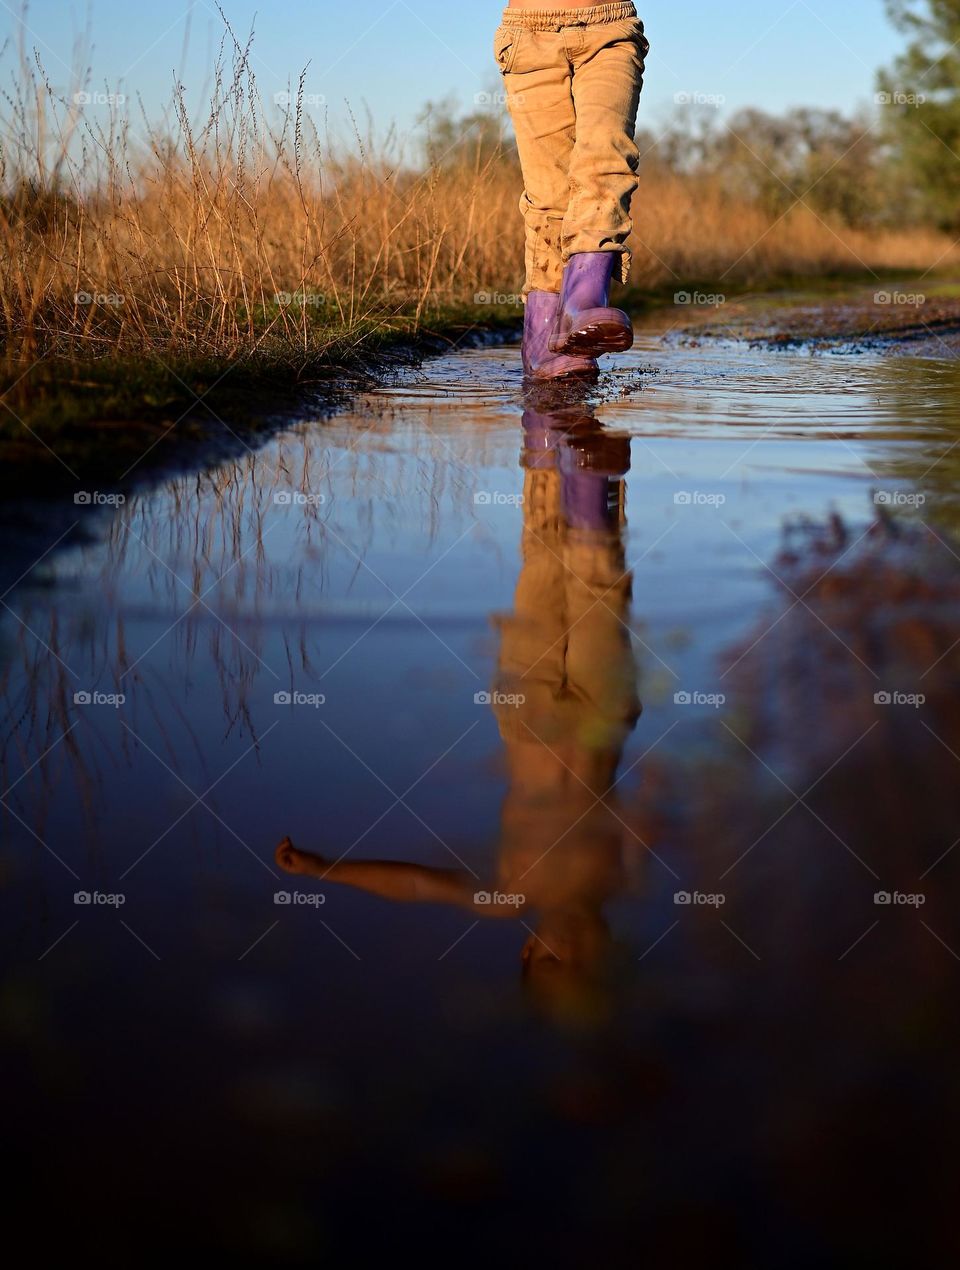 The puddle in the countryside during autumn season after the rain is so fun to play